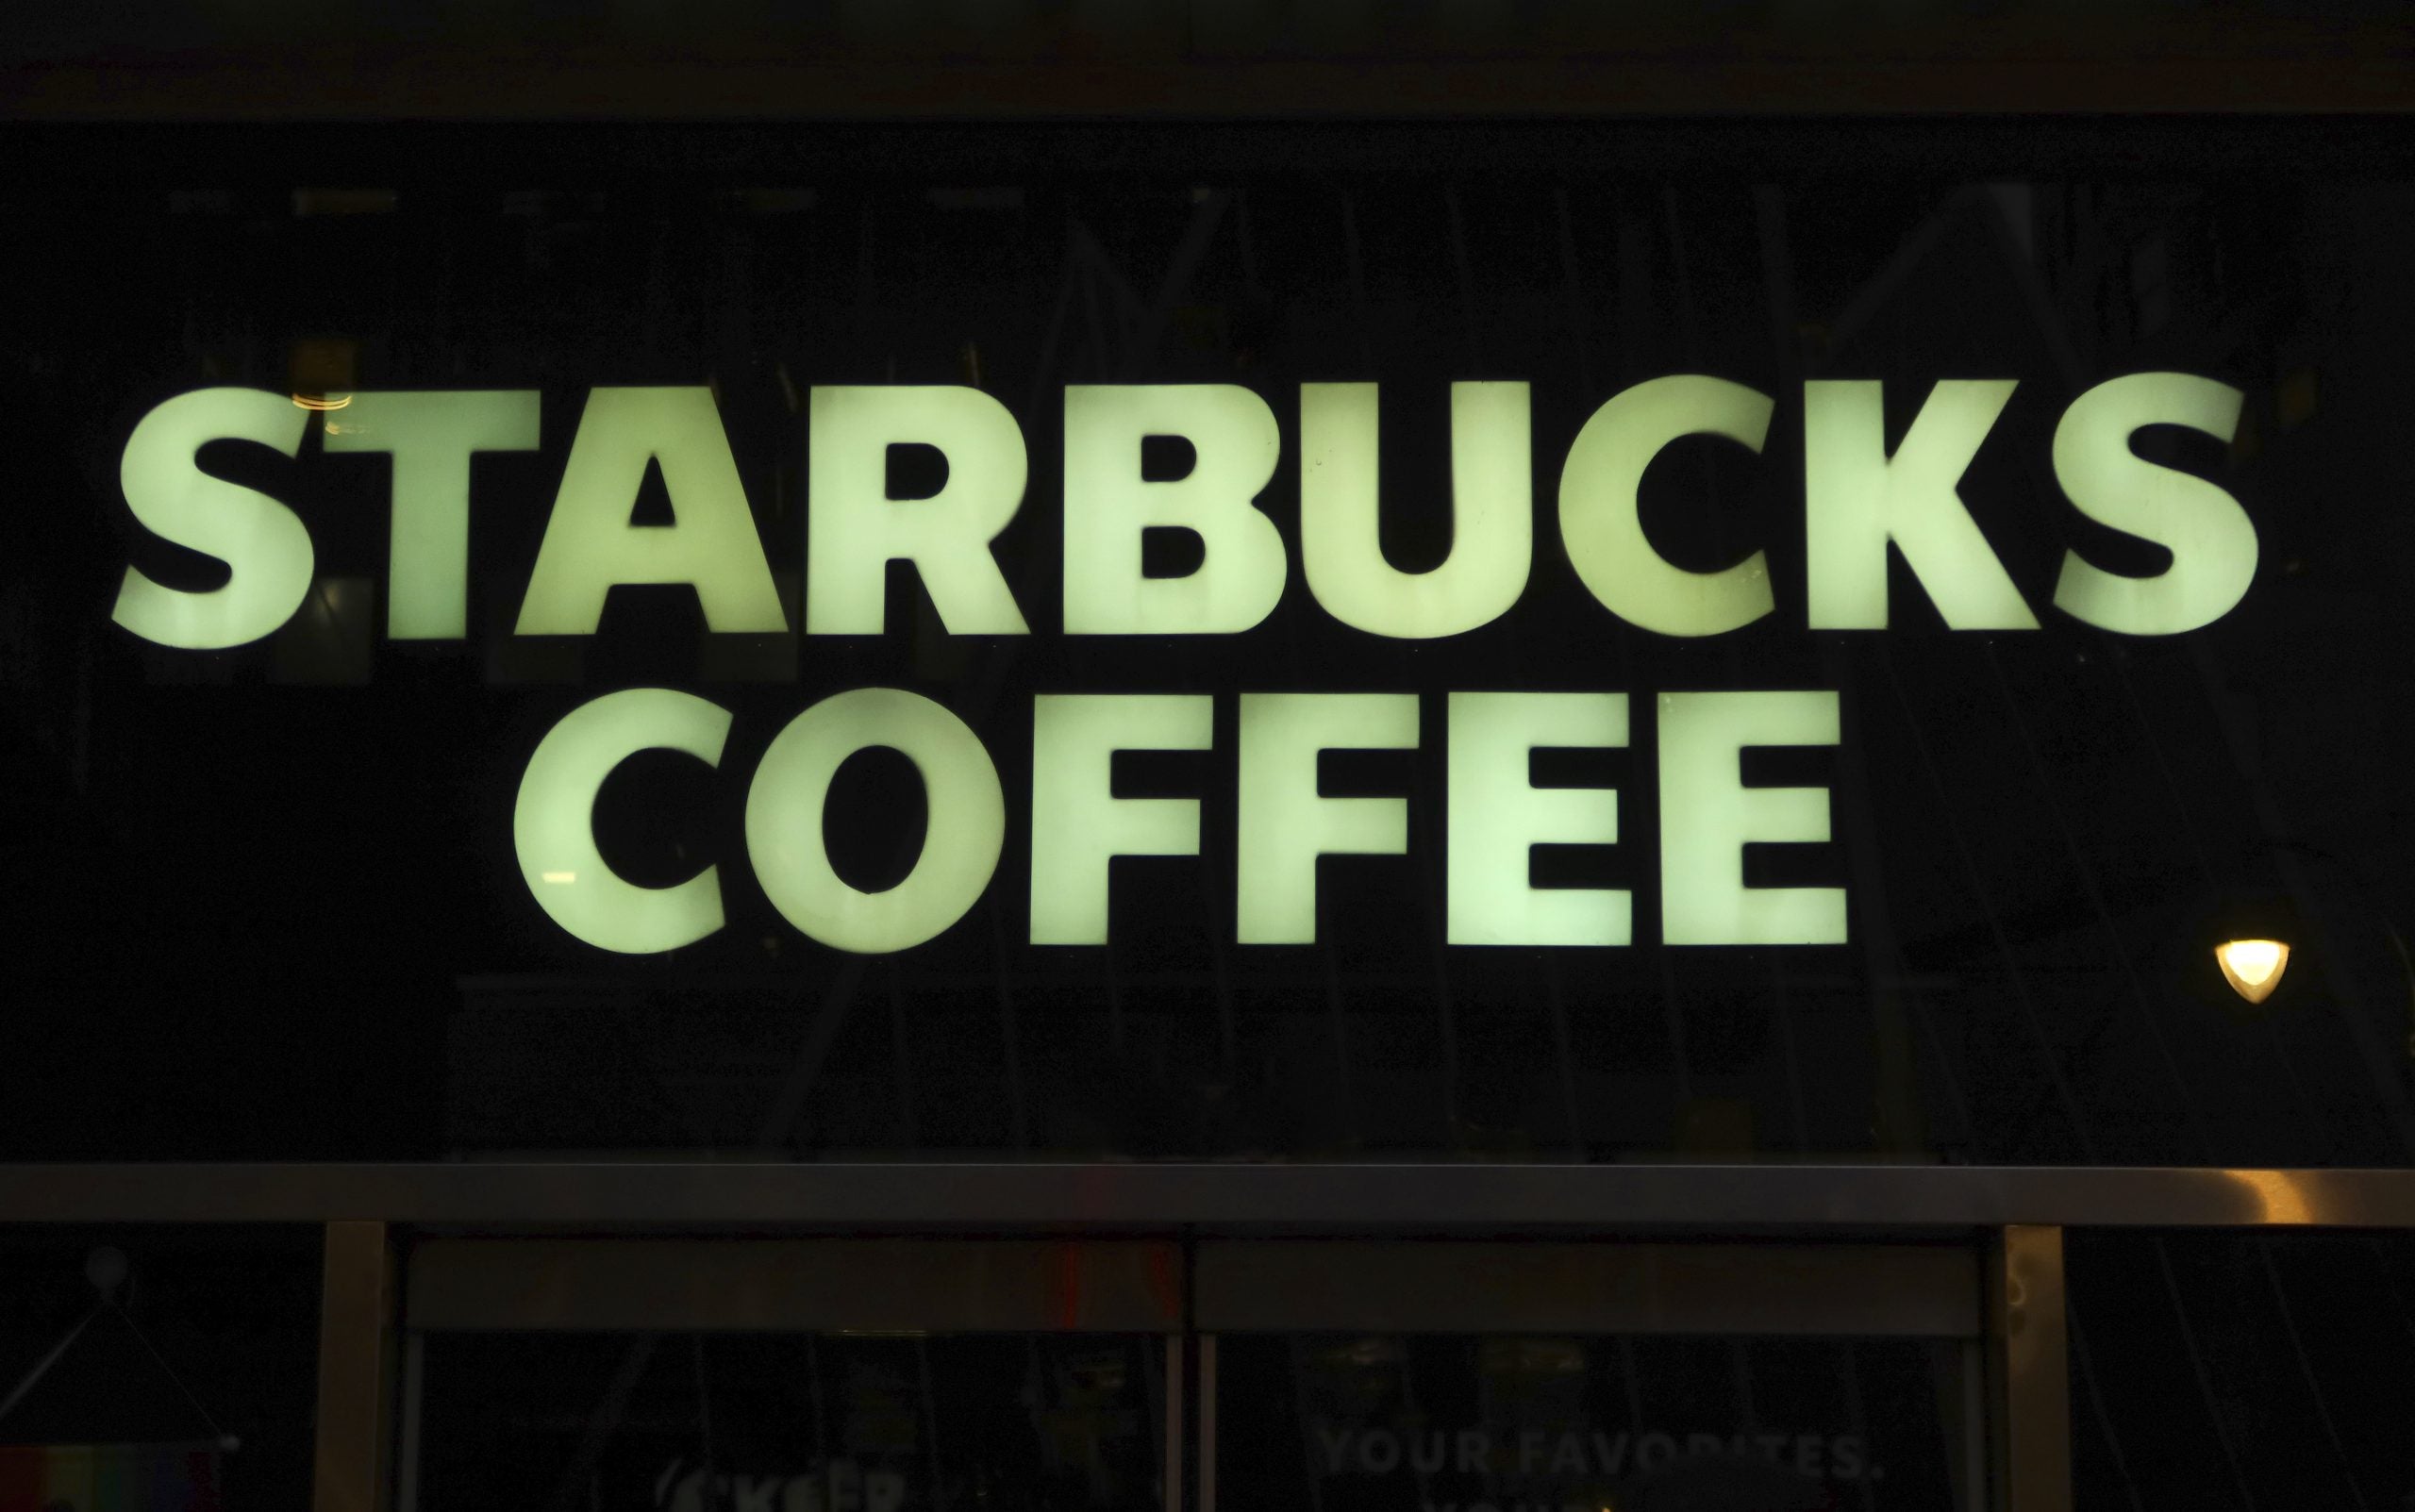 Starbucks To Pay Former Manager $25.6 Million After Lawsuit Alleging She Was Fired For Being White